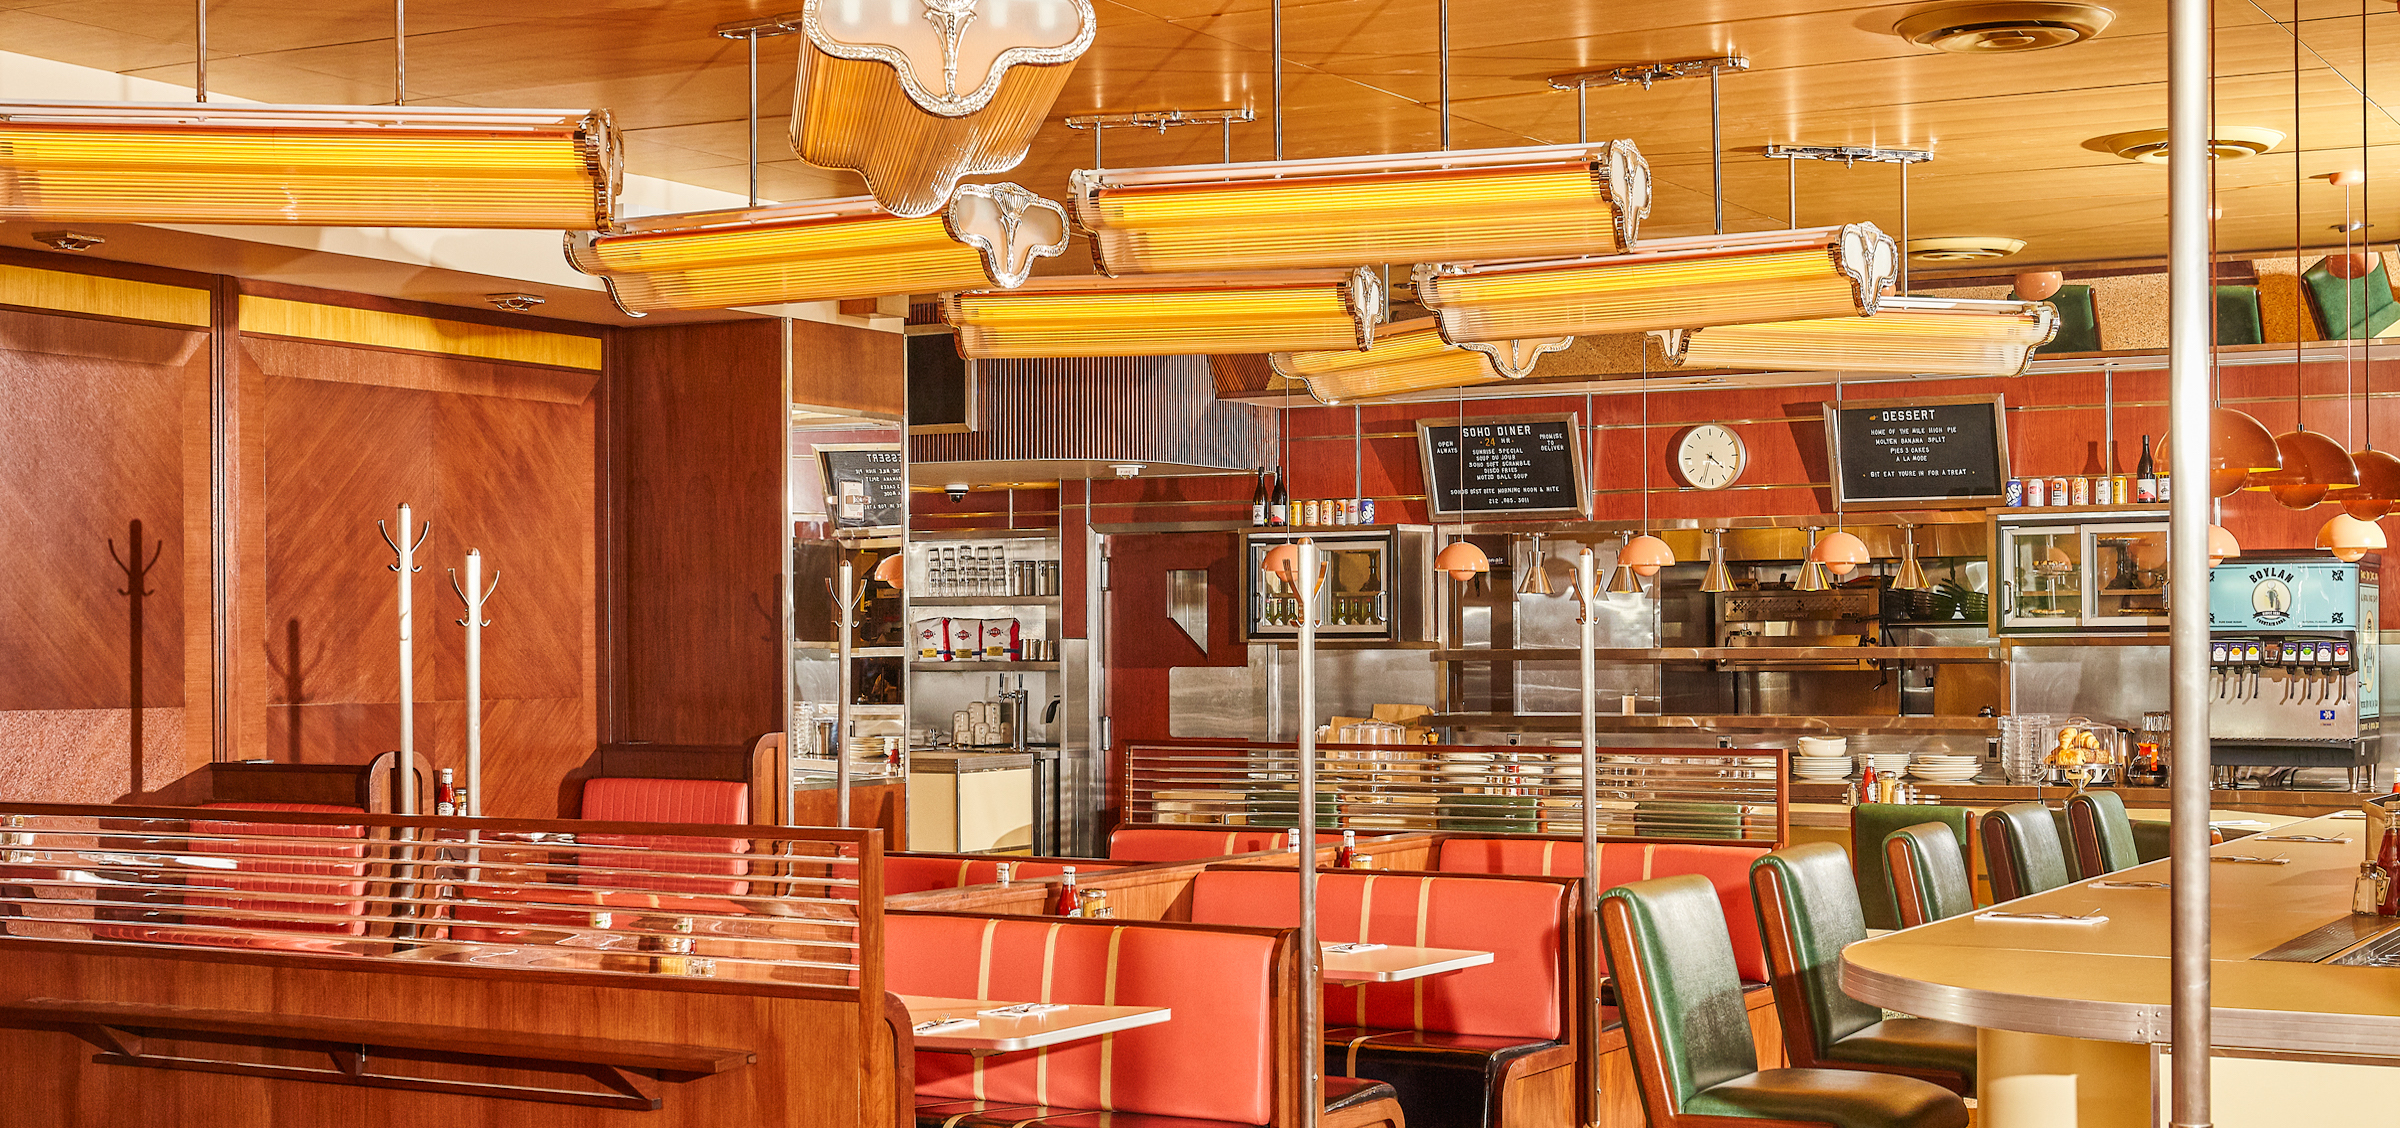 Soho Diner Recreates the Classic NYC Diner for a New Generation